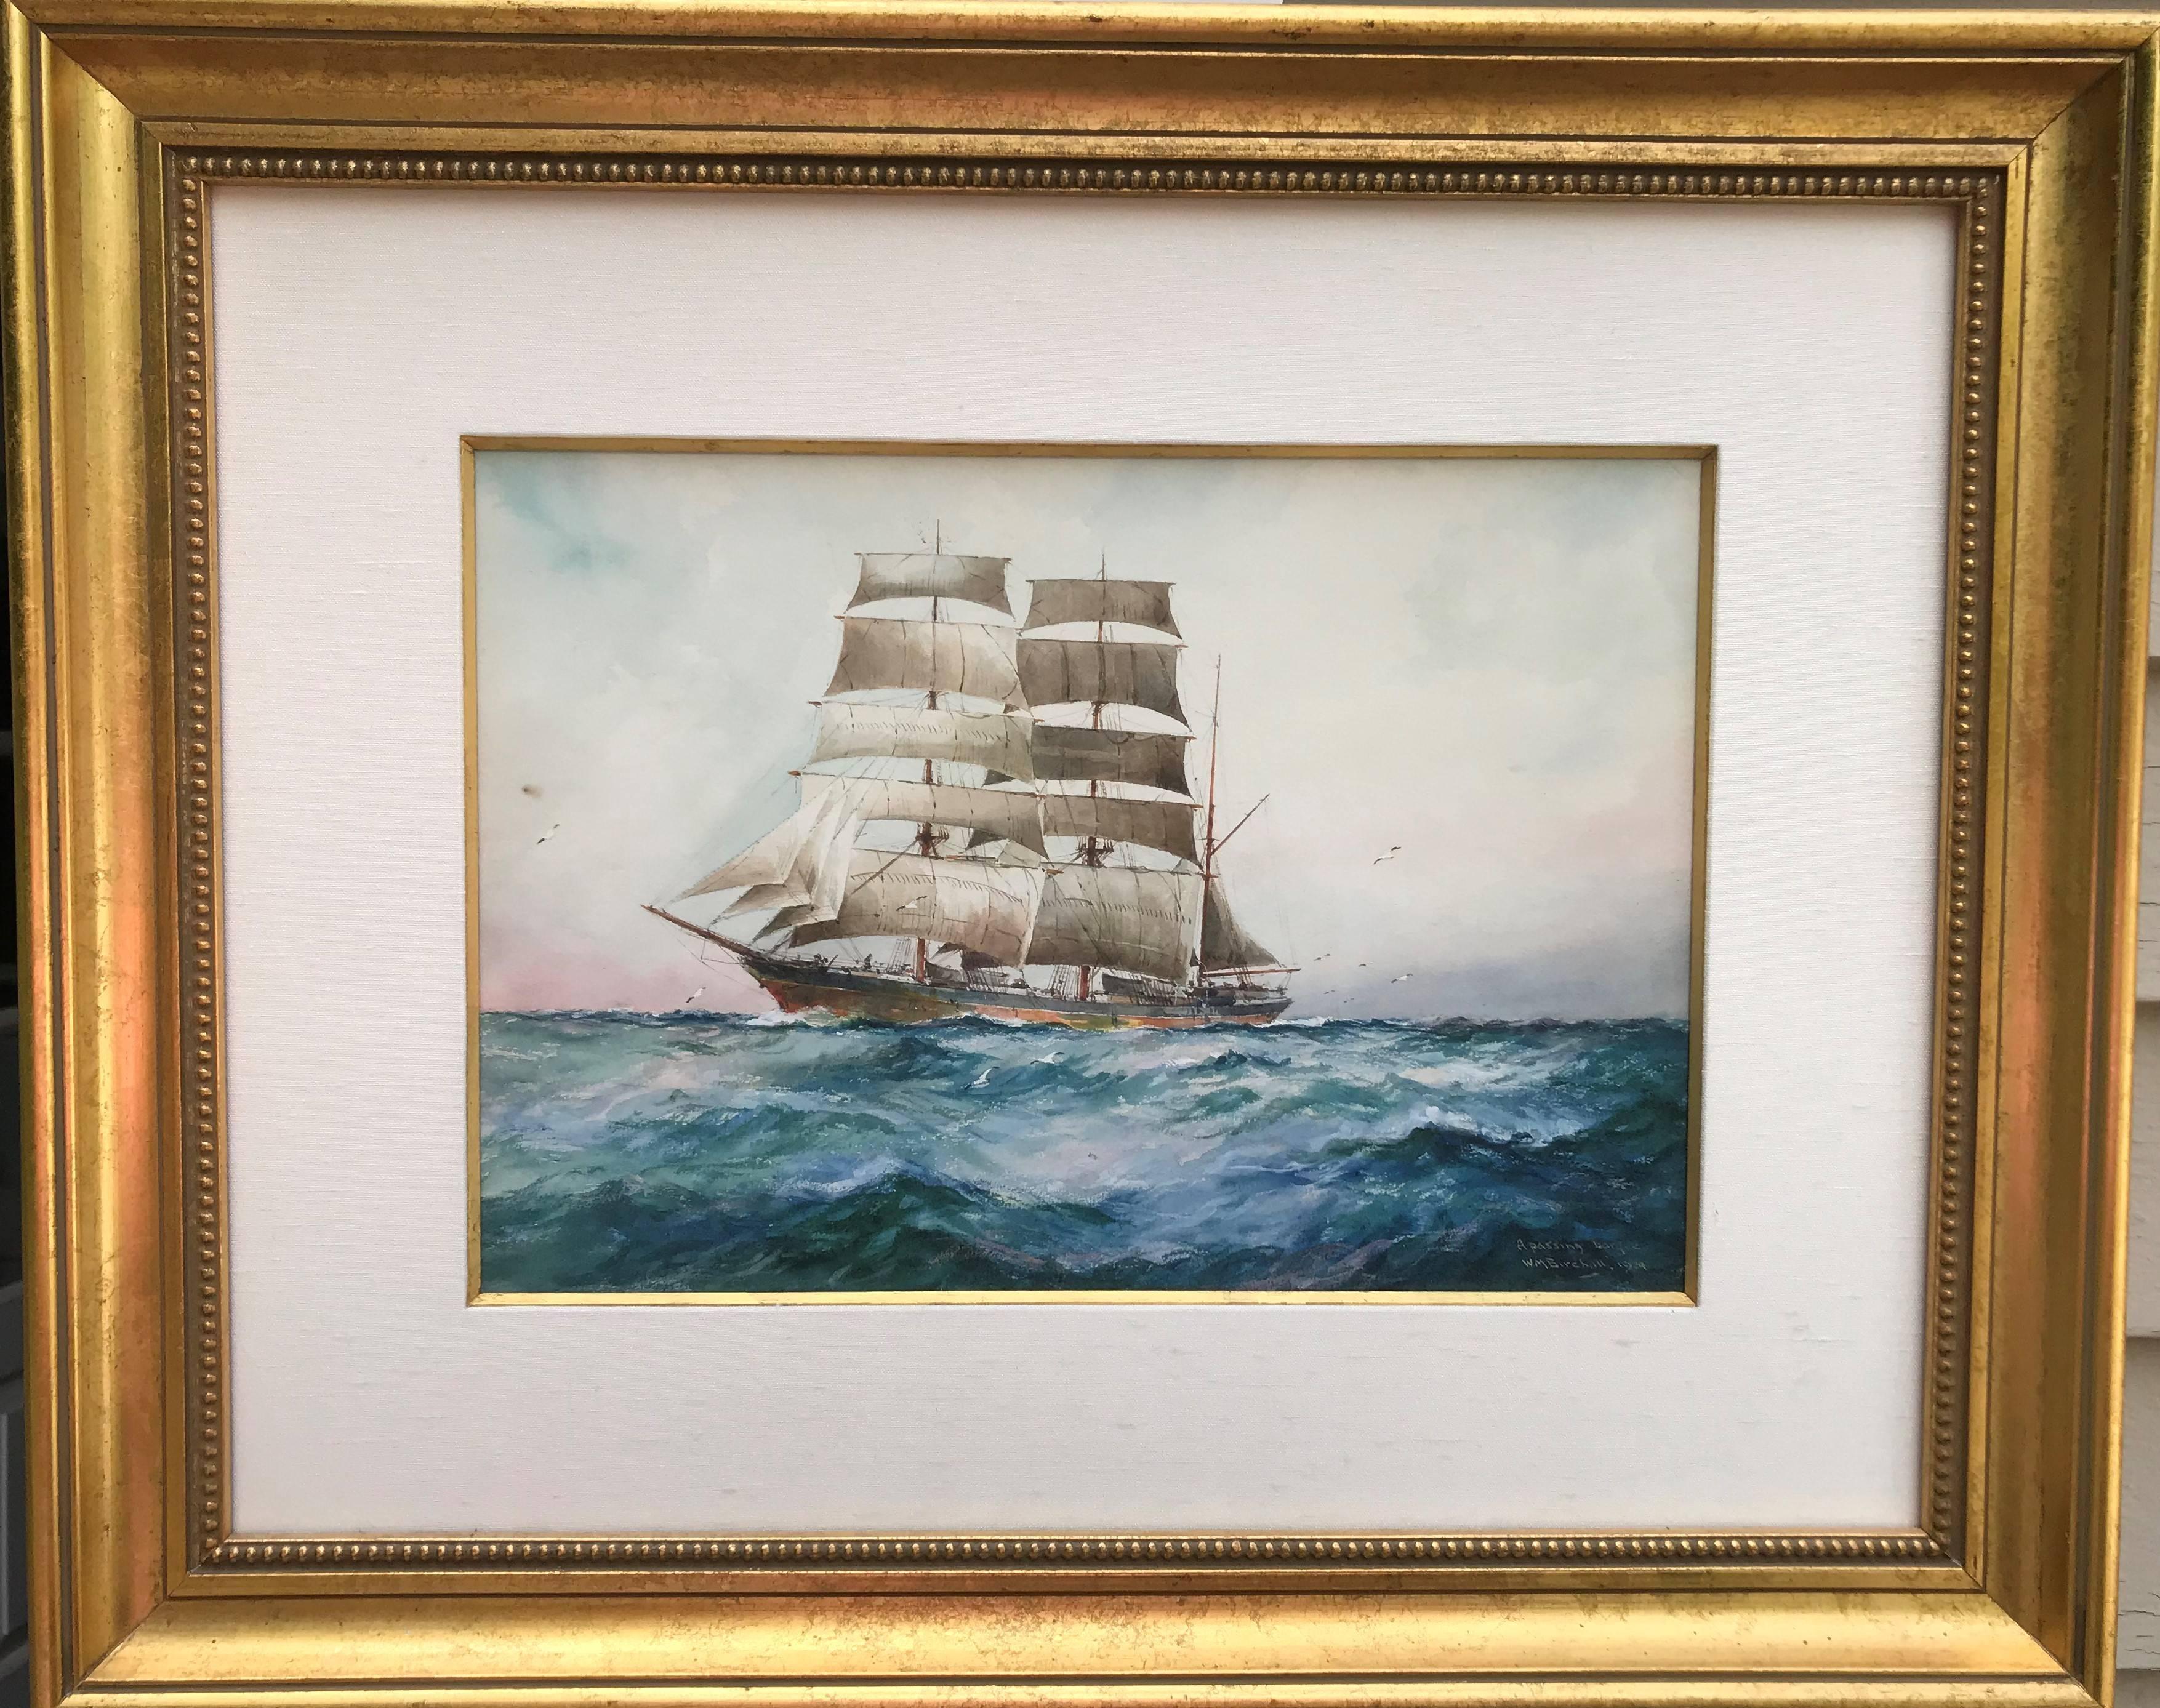 A Passing Sailing Barque in the Open Ocean - Painting by William Minshall Birchall